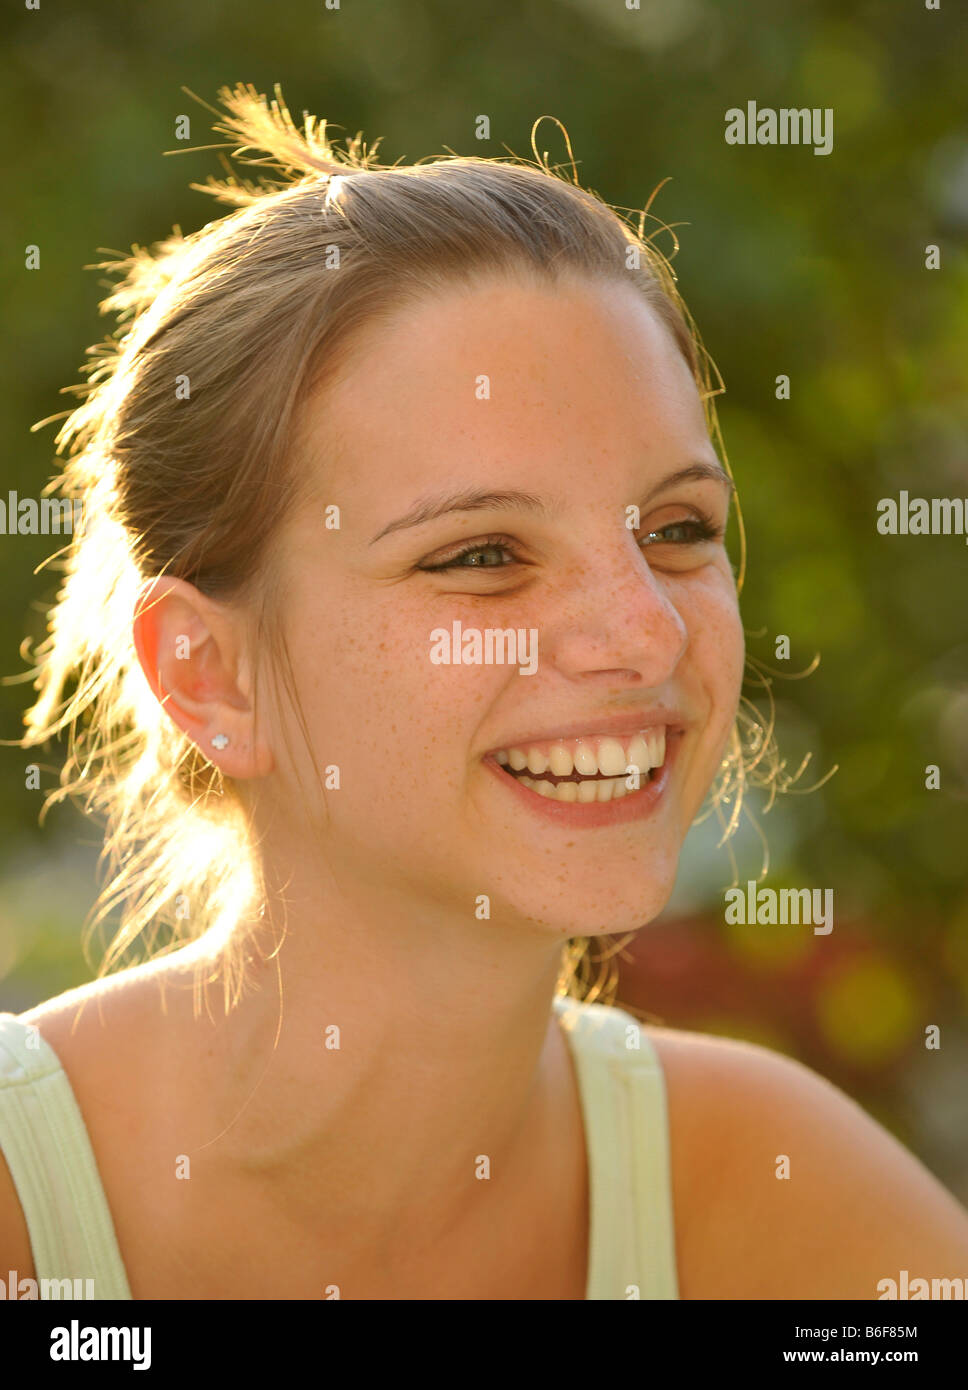 Laughing girl, portrait Stock Photo